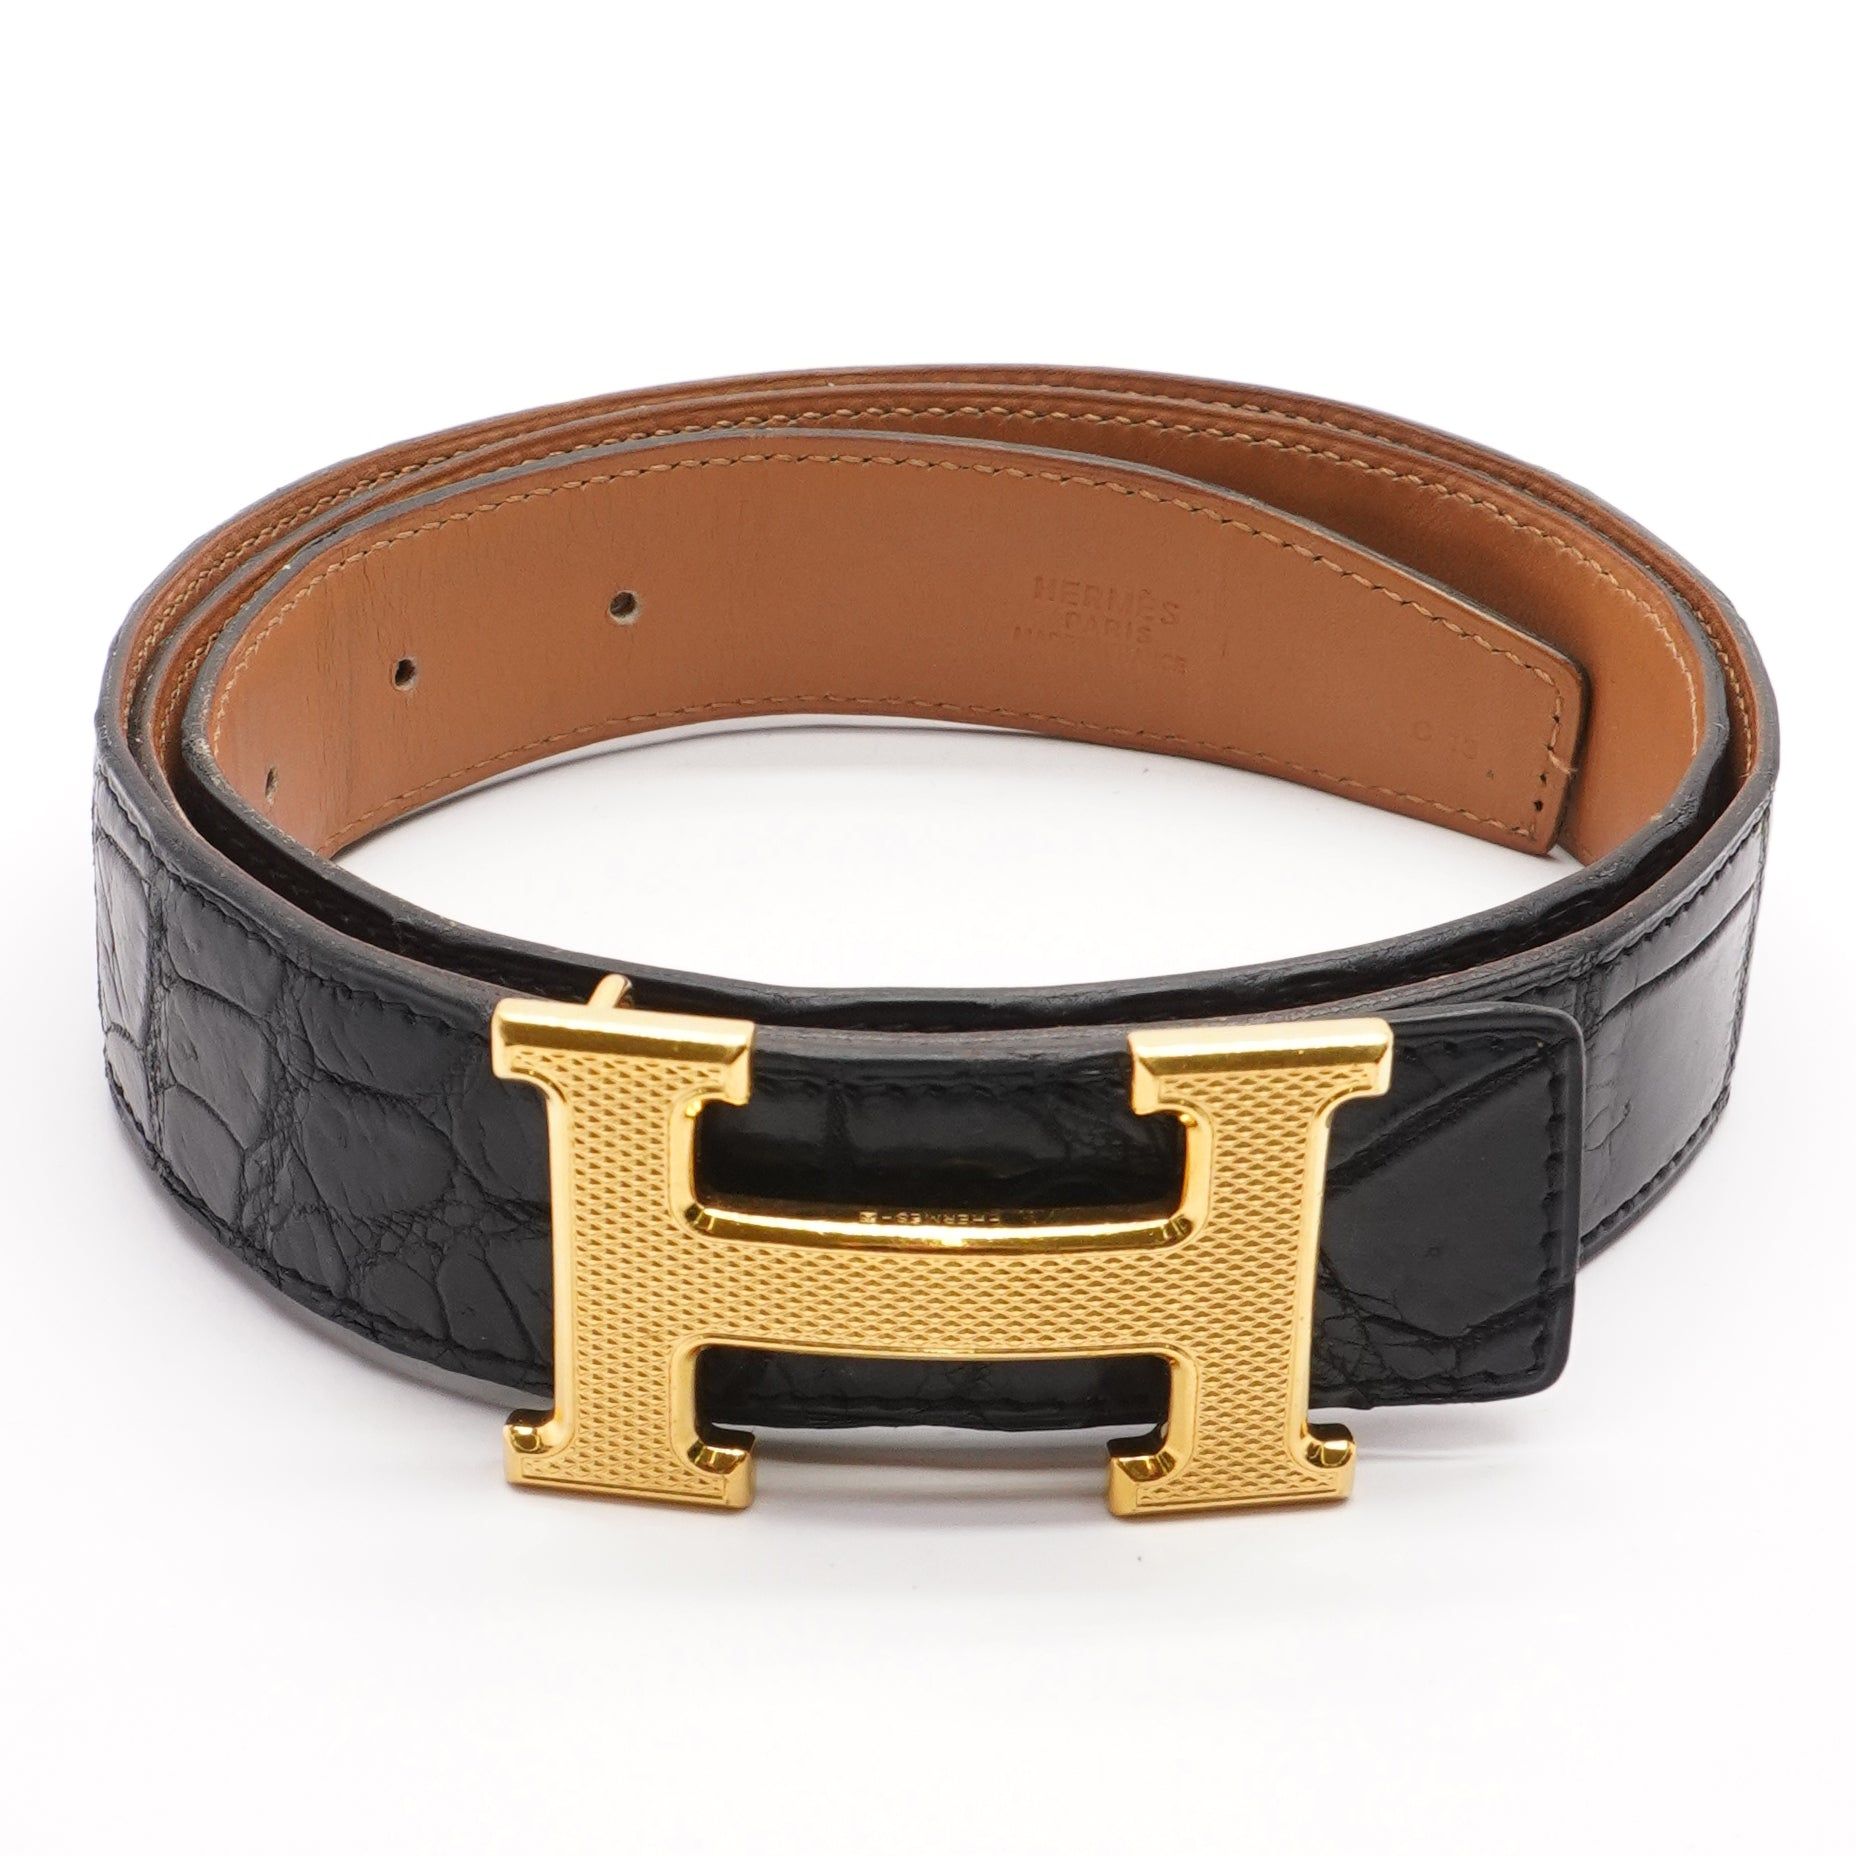 H Guillochee Belt Buckle and Leather Strap 32 mm – Unclaimed Baggage